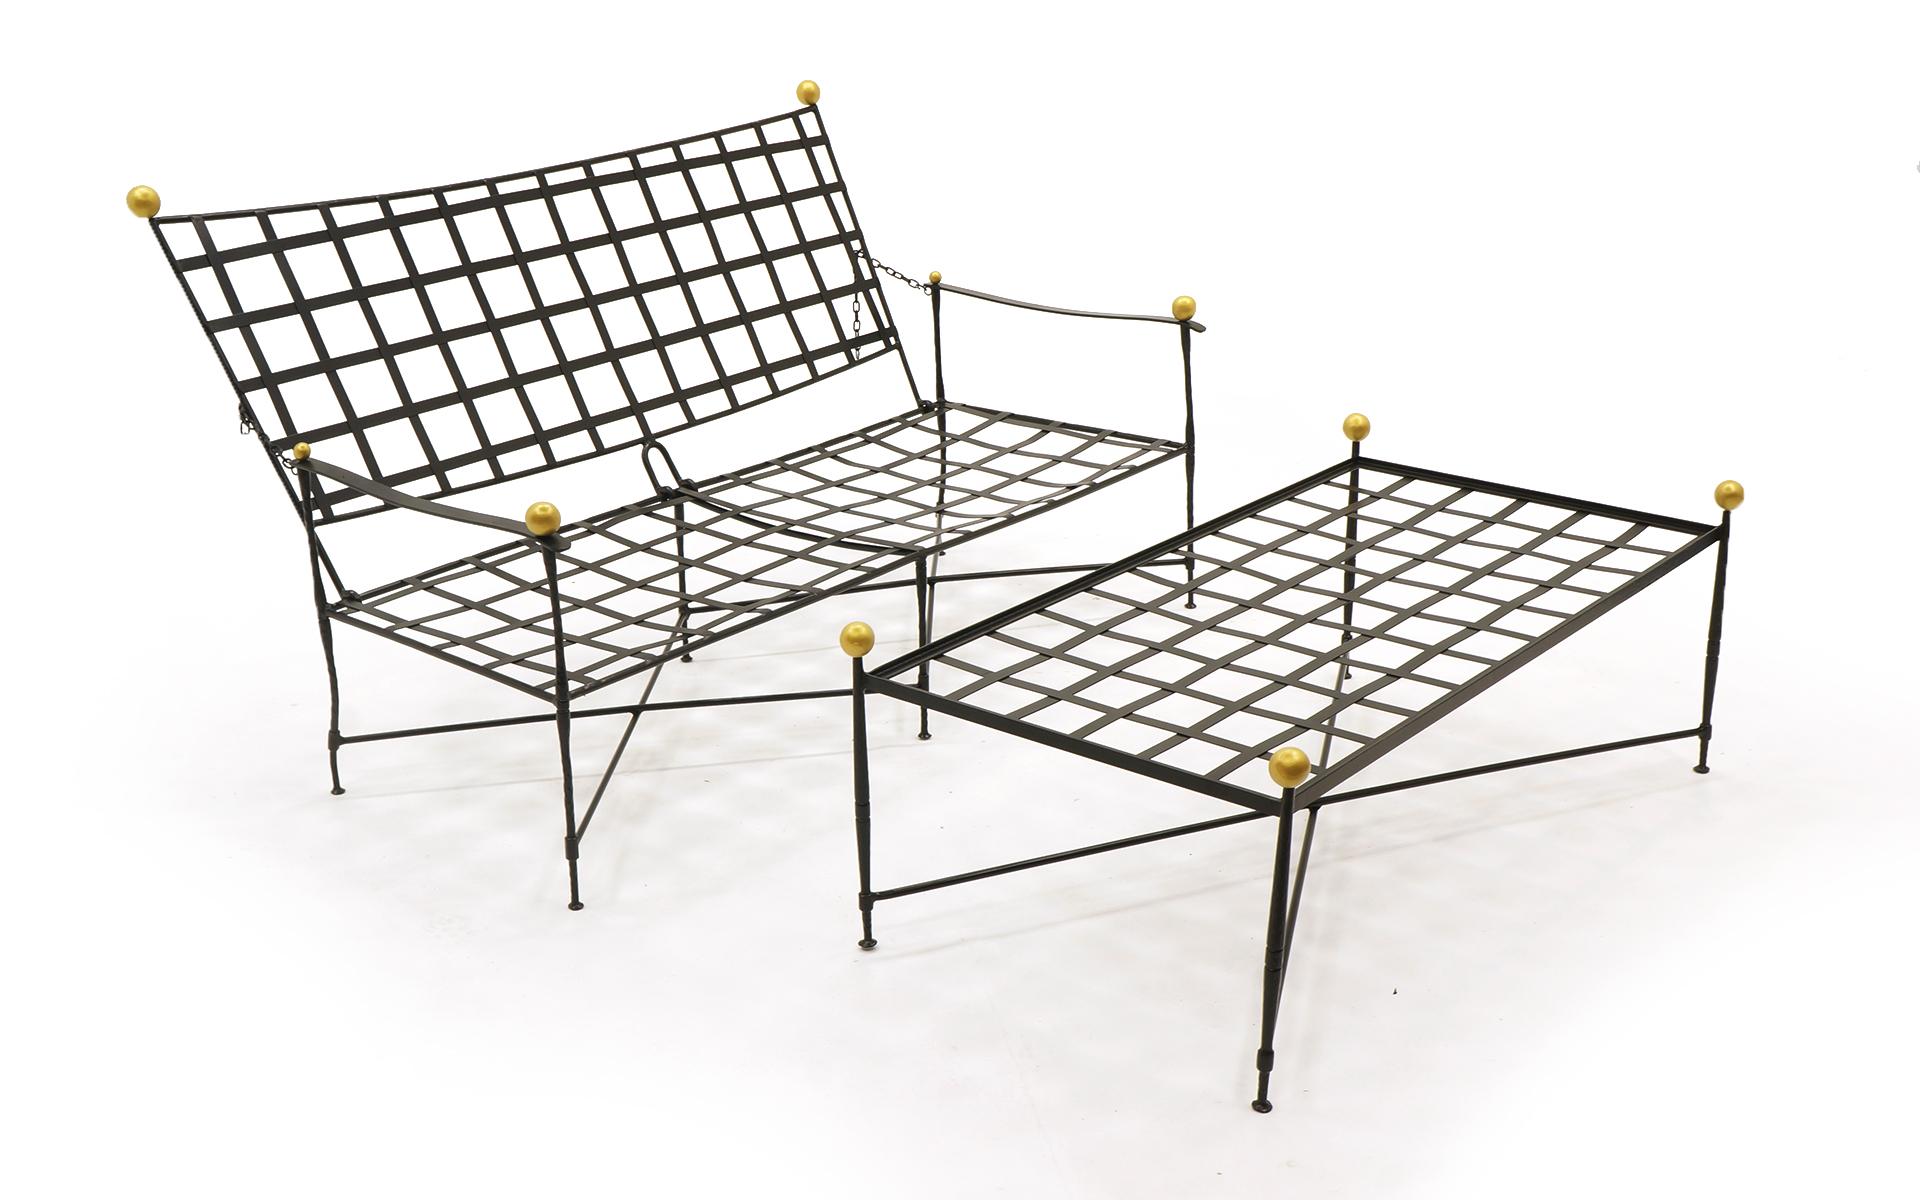 Powder-Coated Outdoor Coffee Table or Bench by Mario Papperzini for John Salterini, Restored